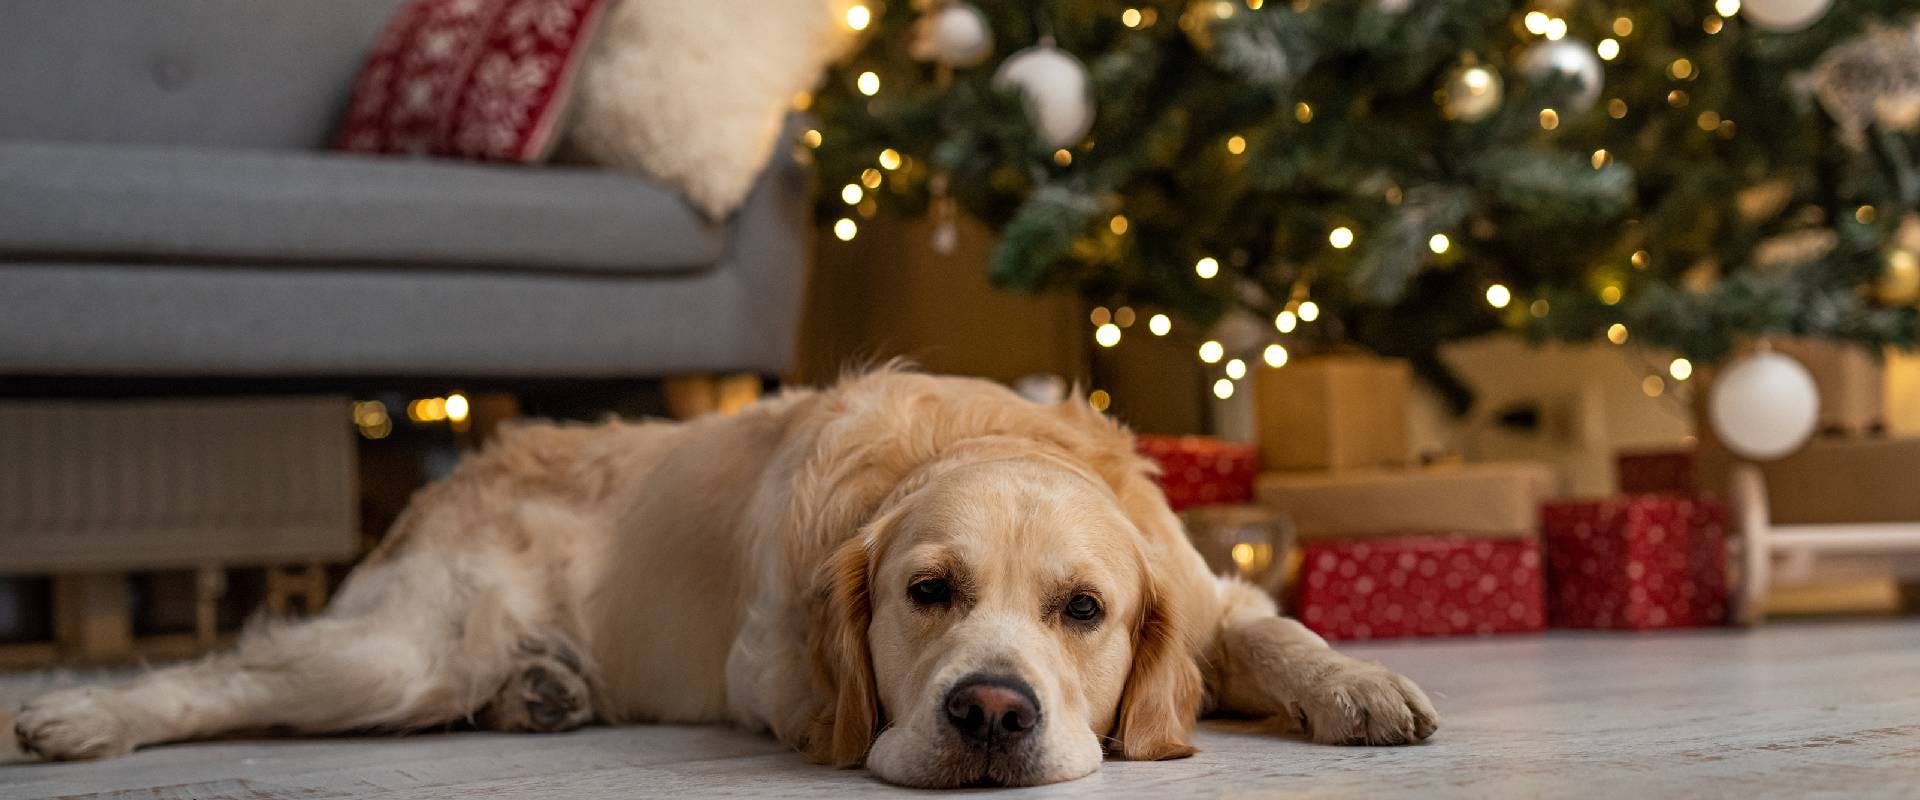 Golden Retriever laying in front of a Christmas tree